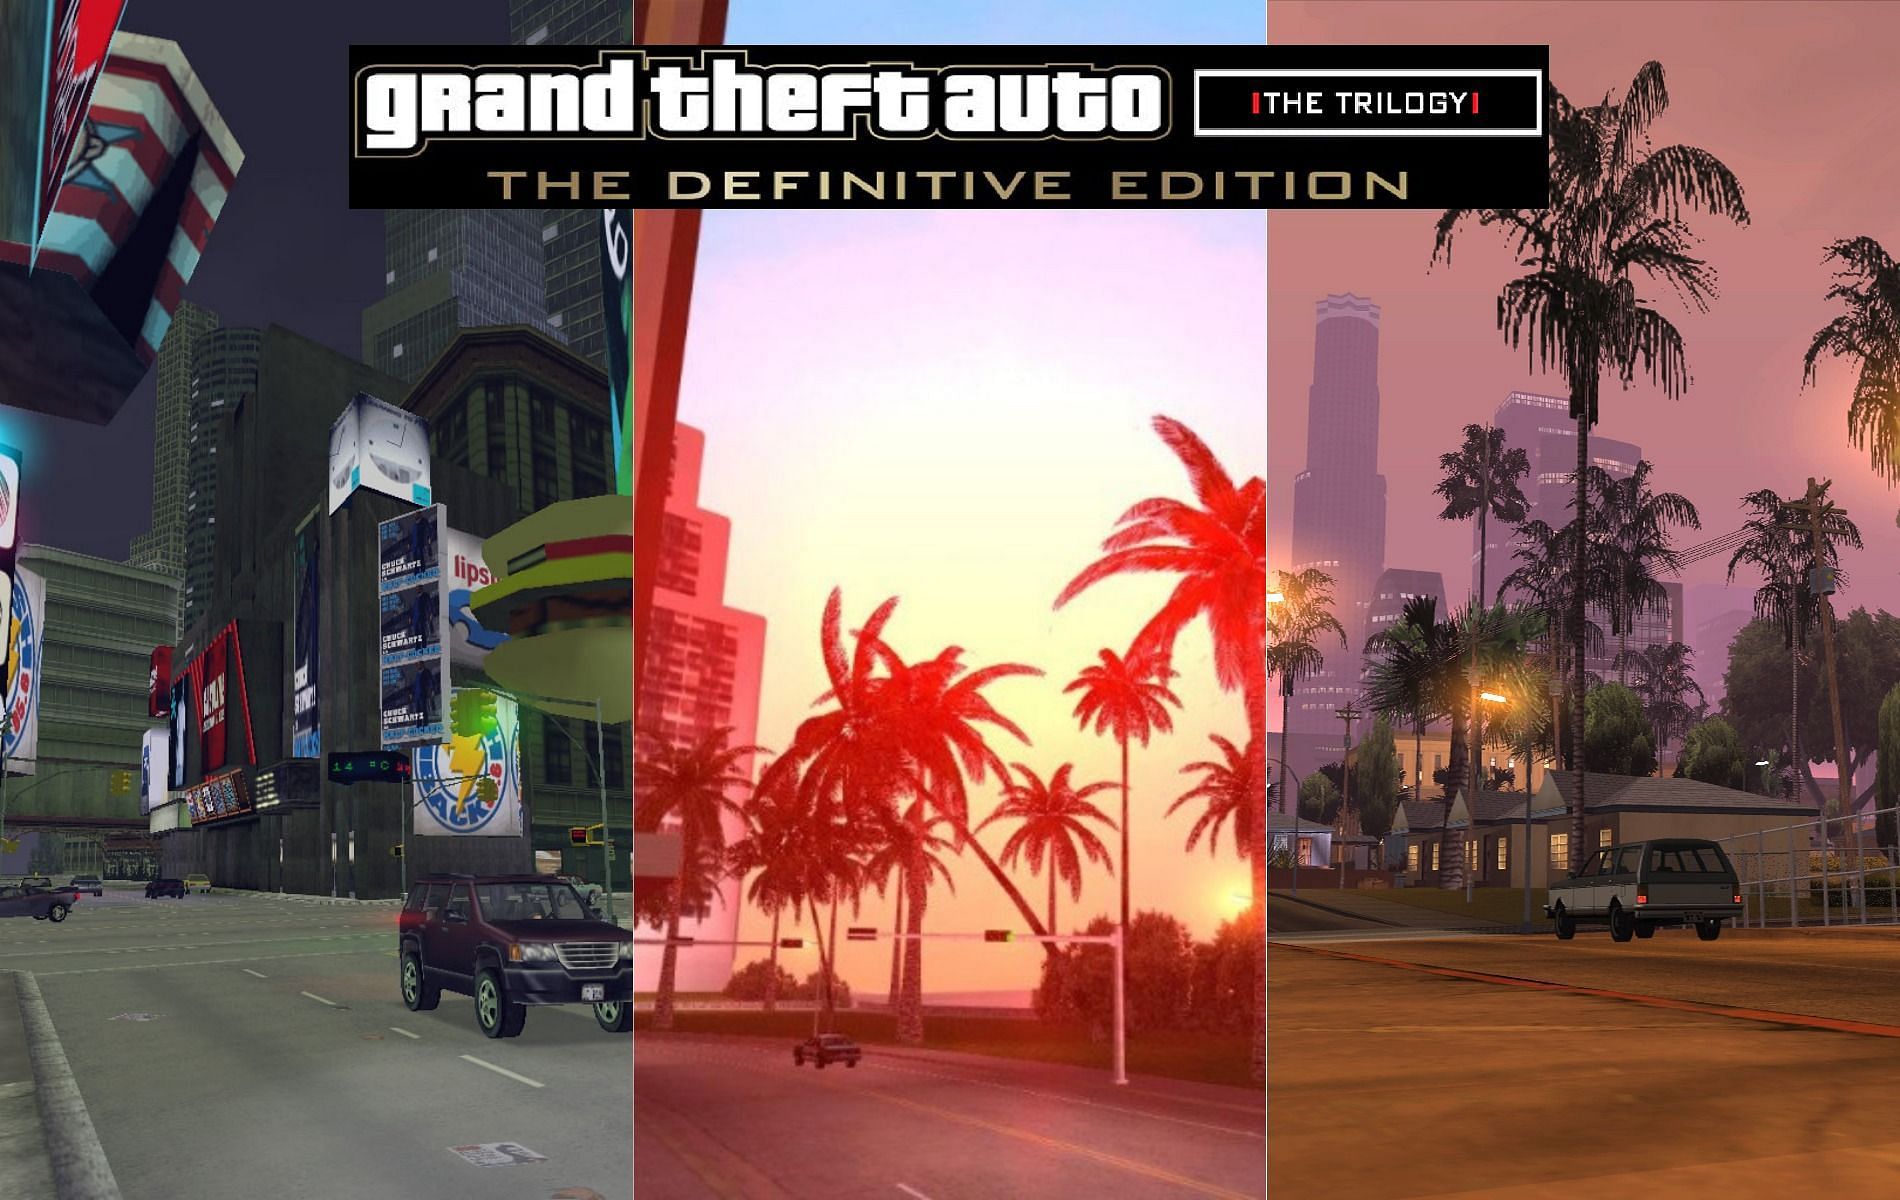 Here are the PC requirements for Grand Theft Auto: The Trilogy